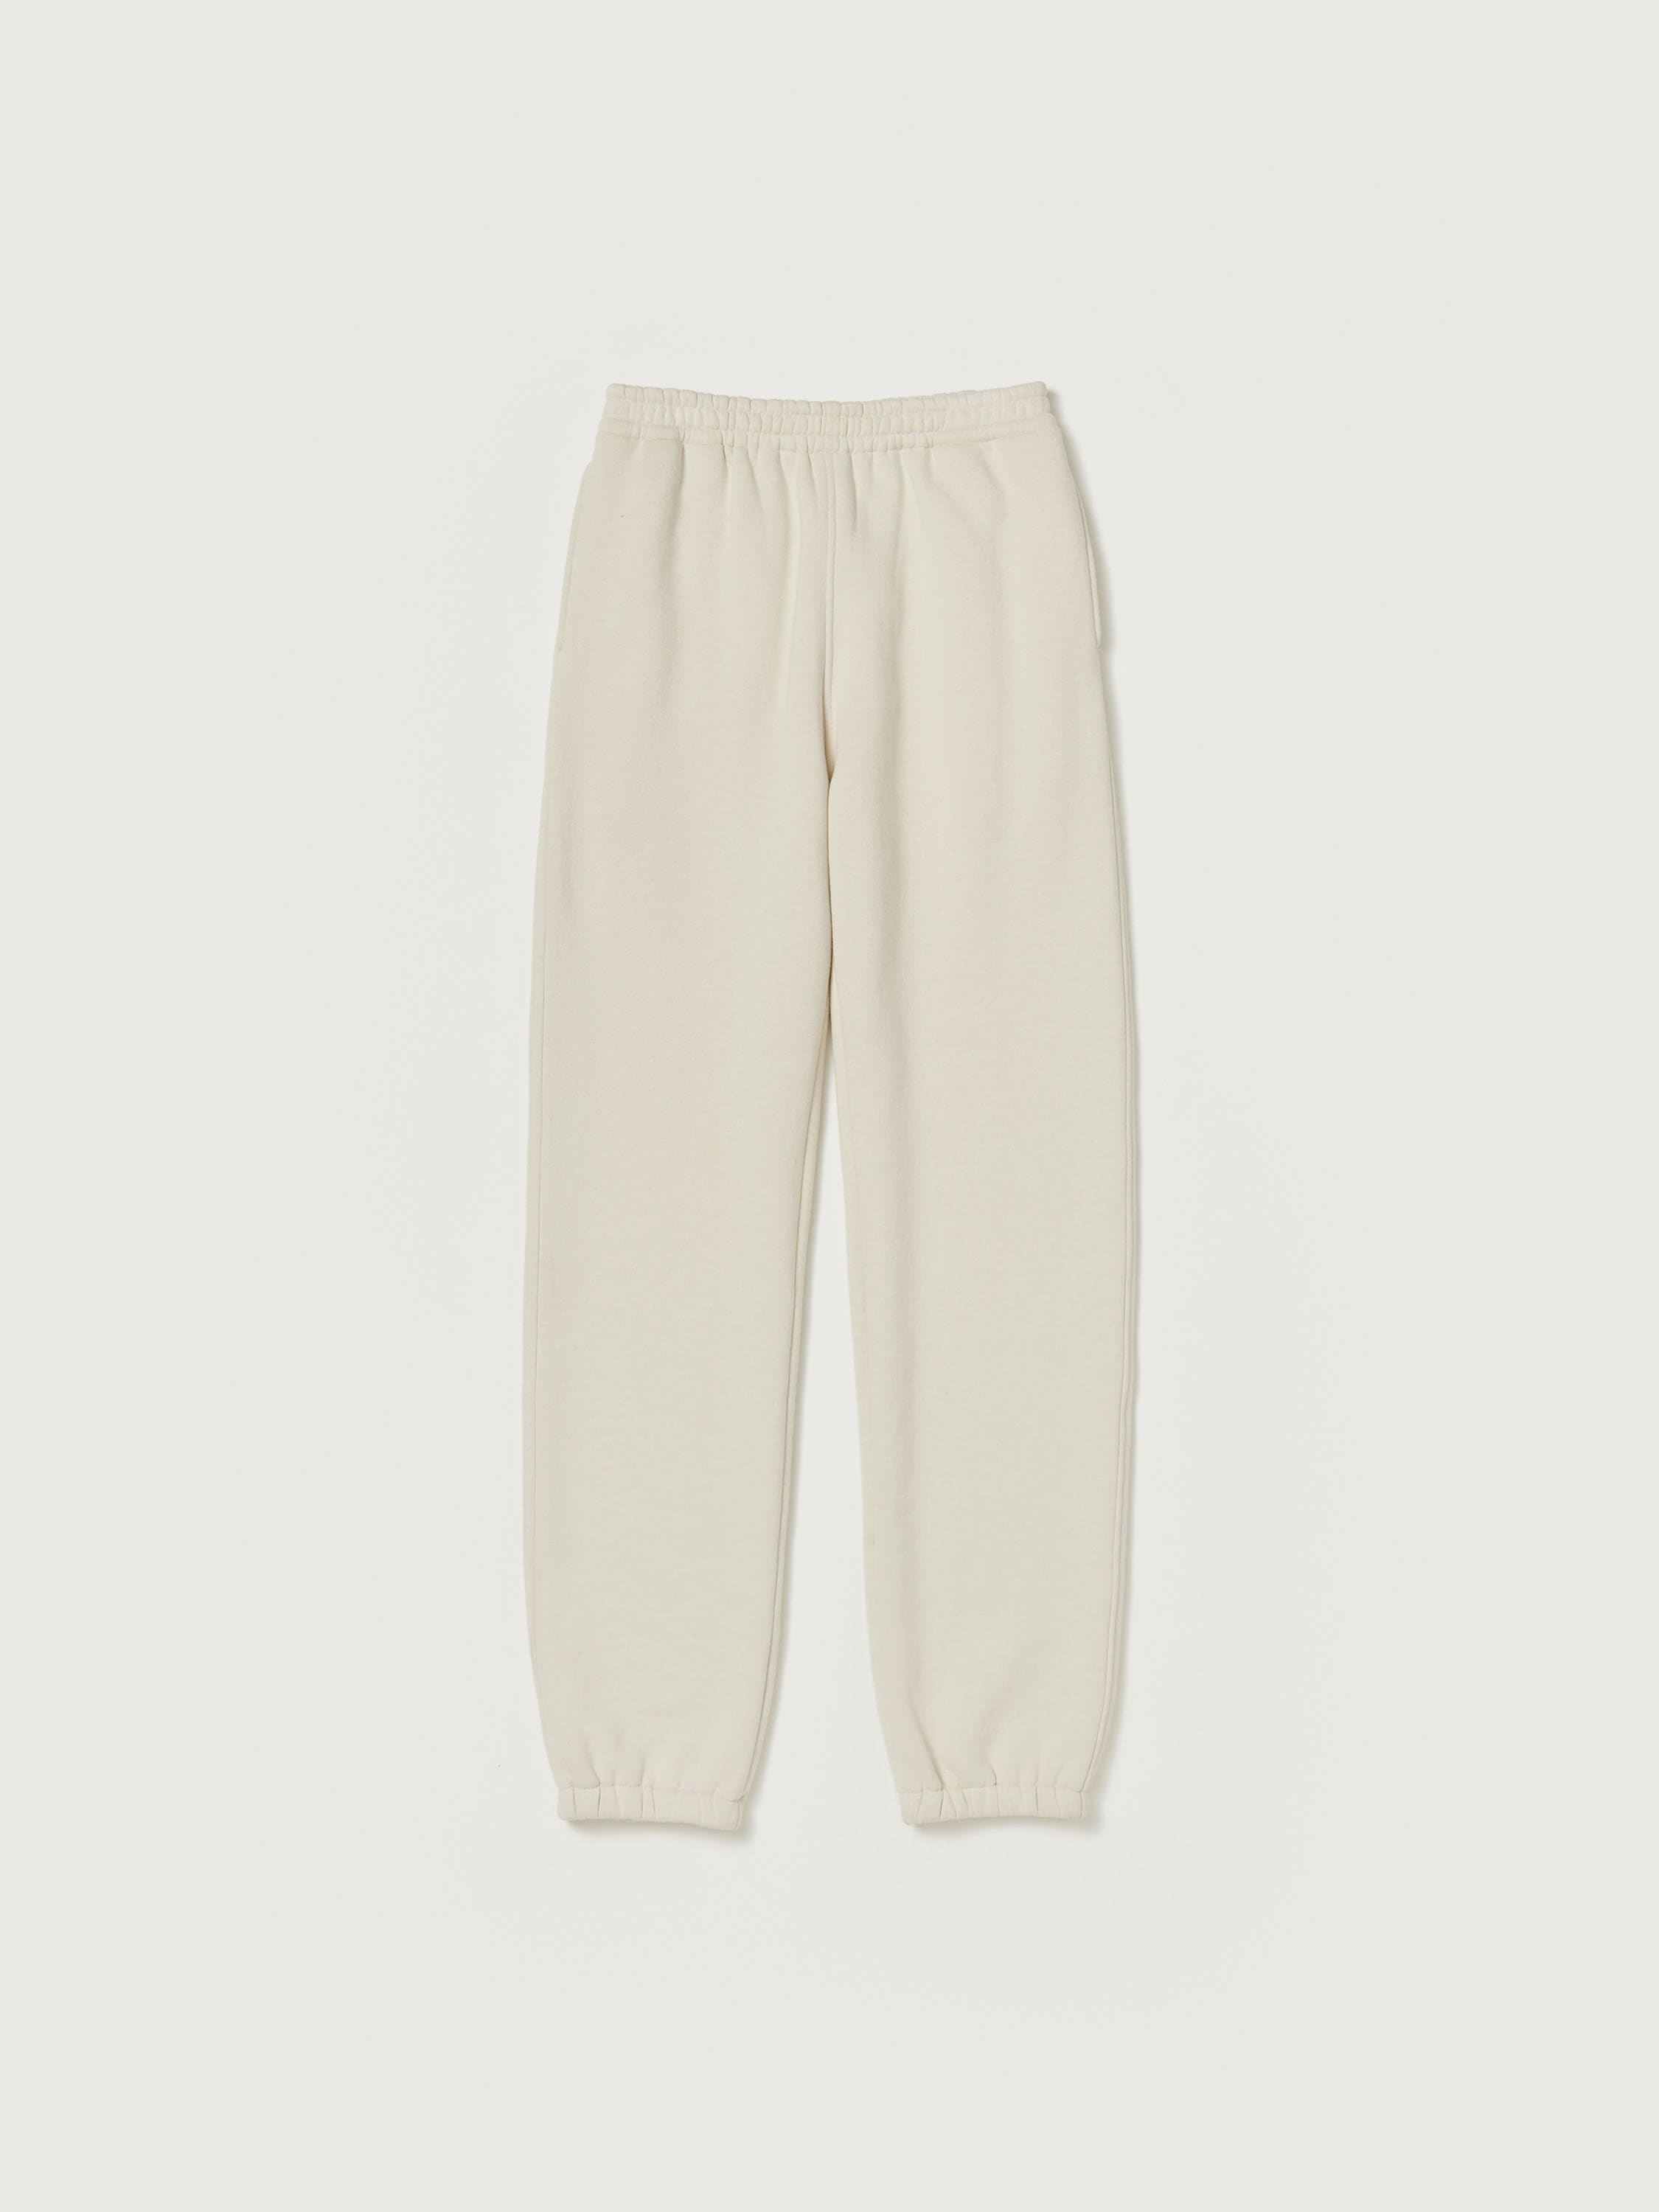 SMOOTH SOFT SWEAT PANTS - AURALEE Official Website